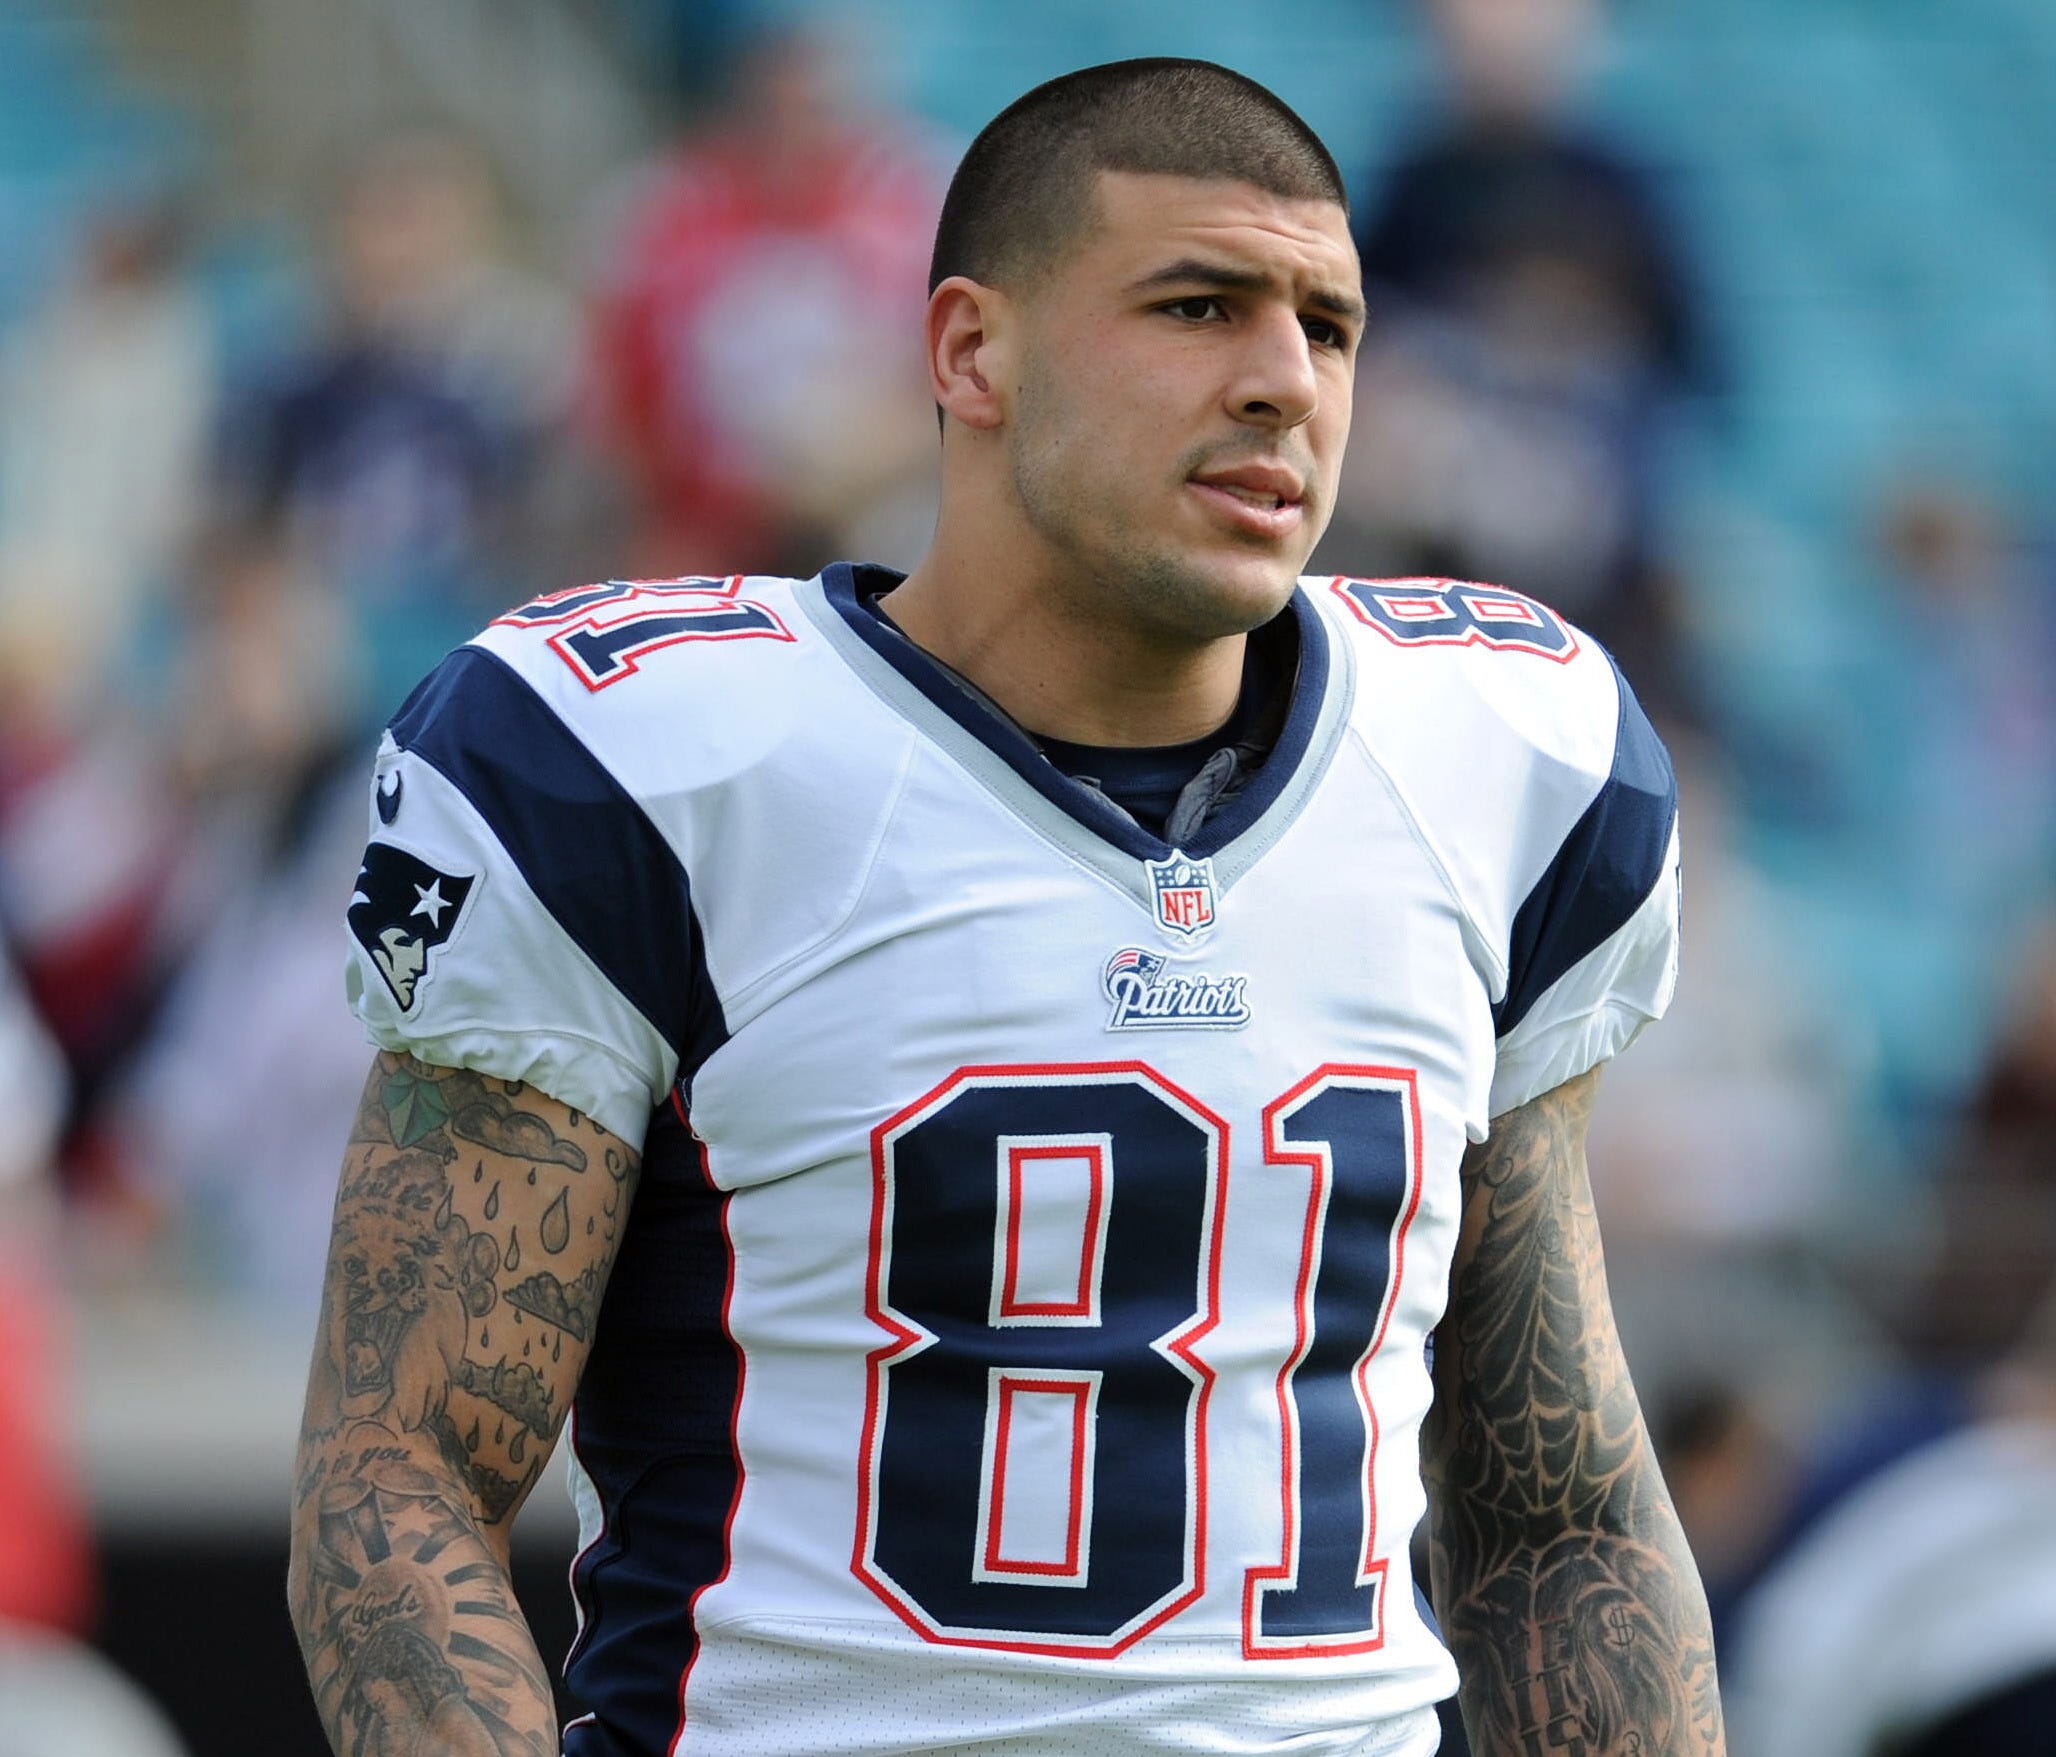 Former New England Patriots tight end Aaron Hernandez (81) warms up before the start of the game against the Jacksonville Jaguars at EverBank Field.